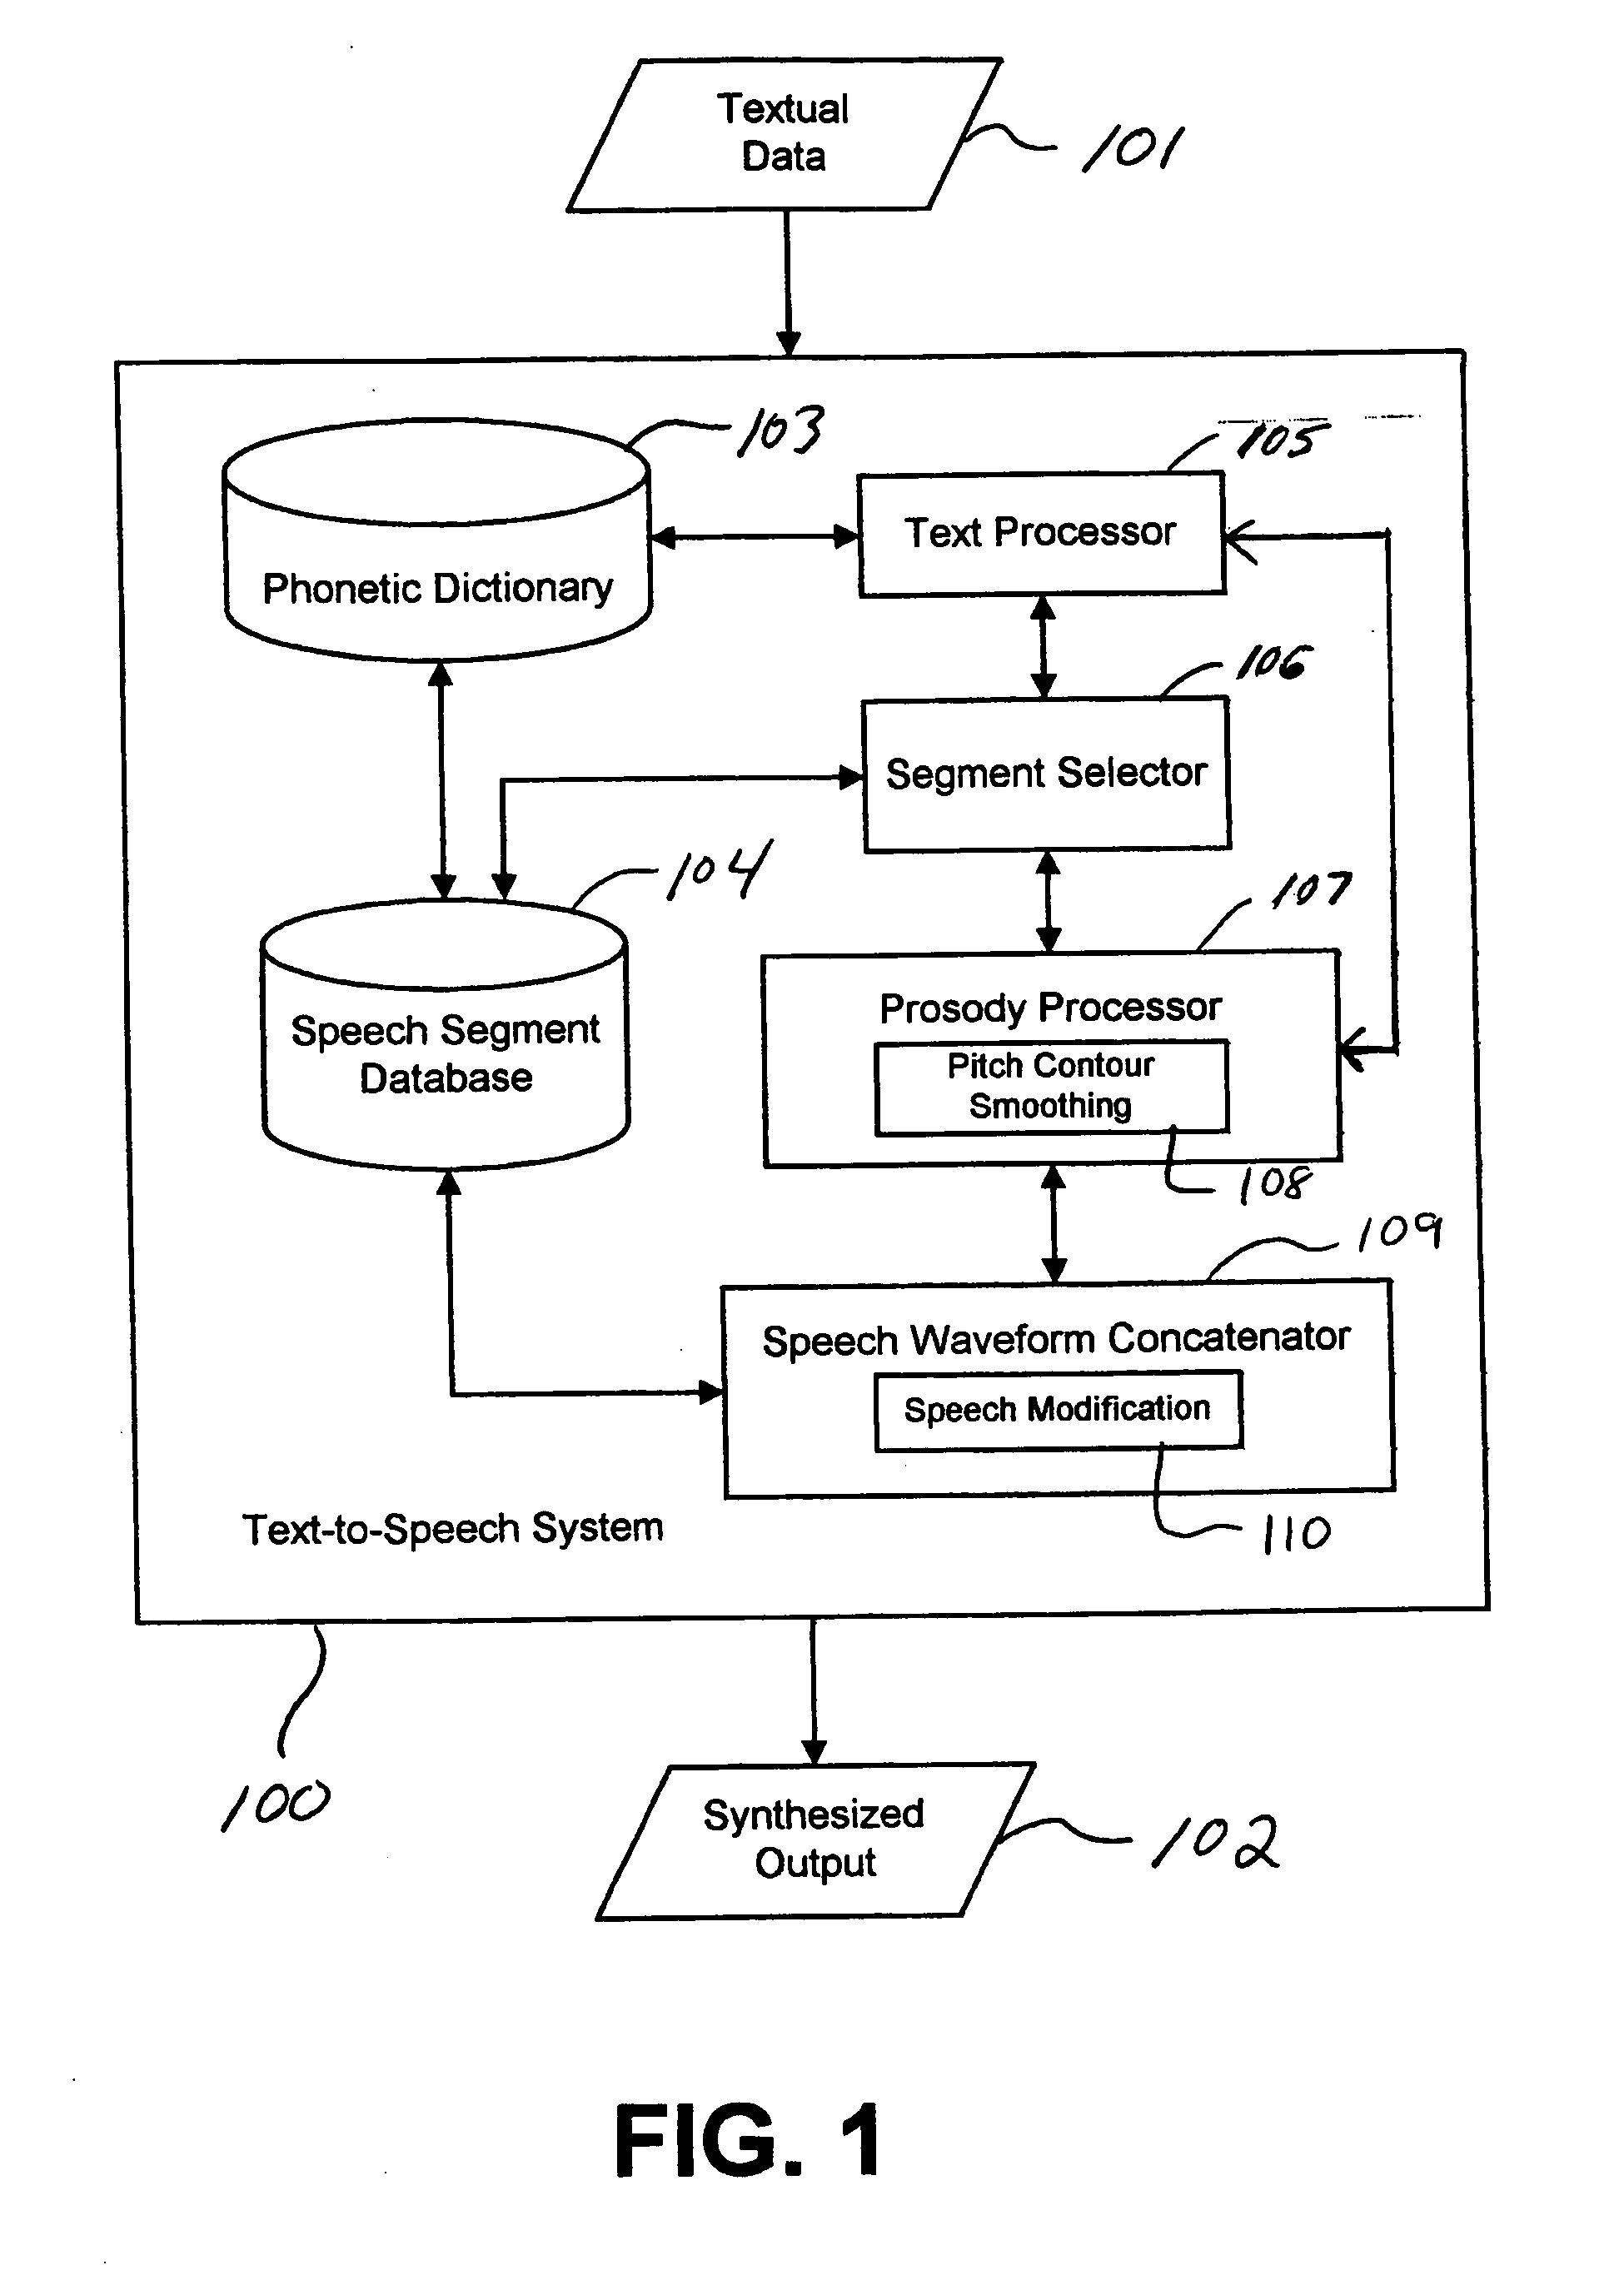 Systems and methods for pitch smoothing for text-to-speech synthesis